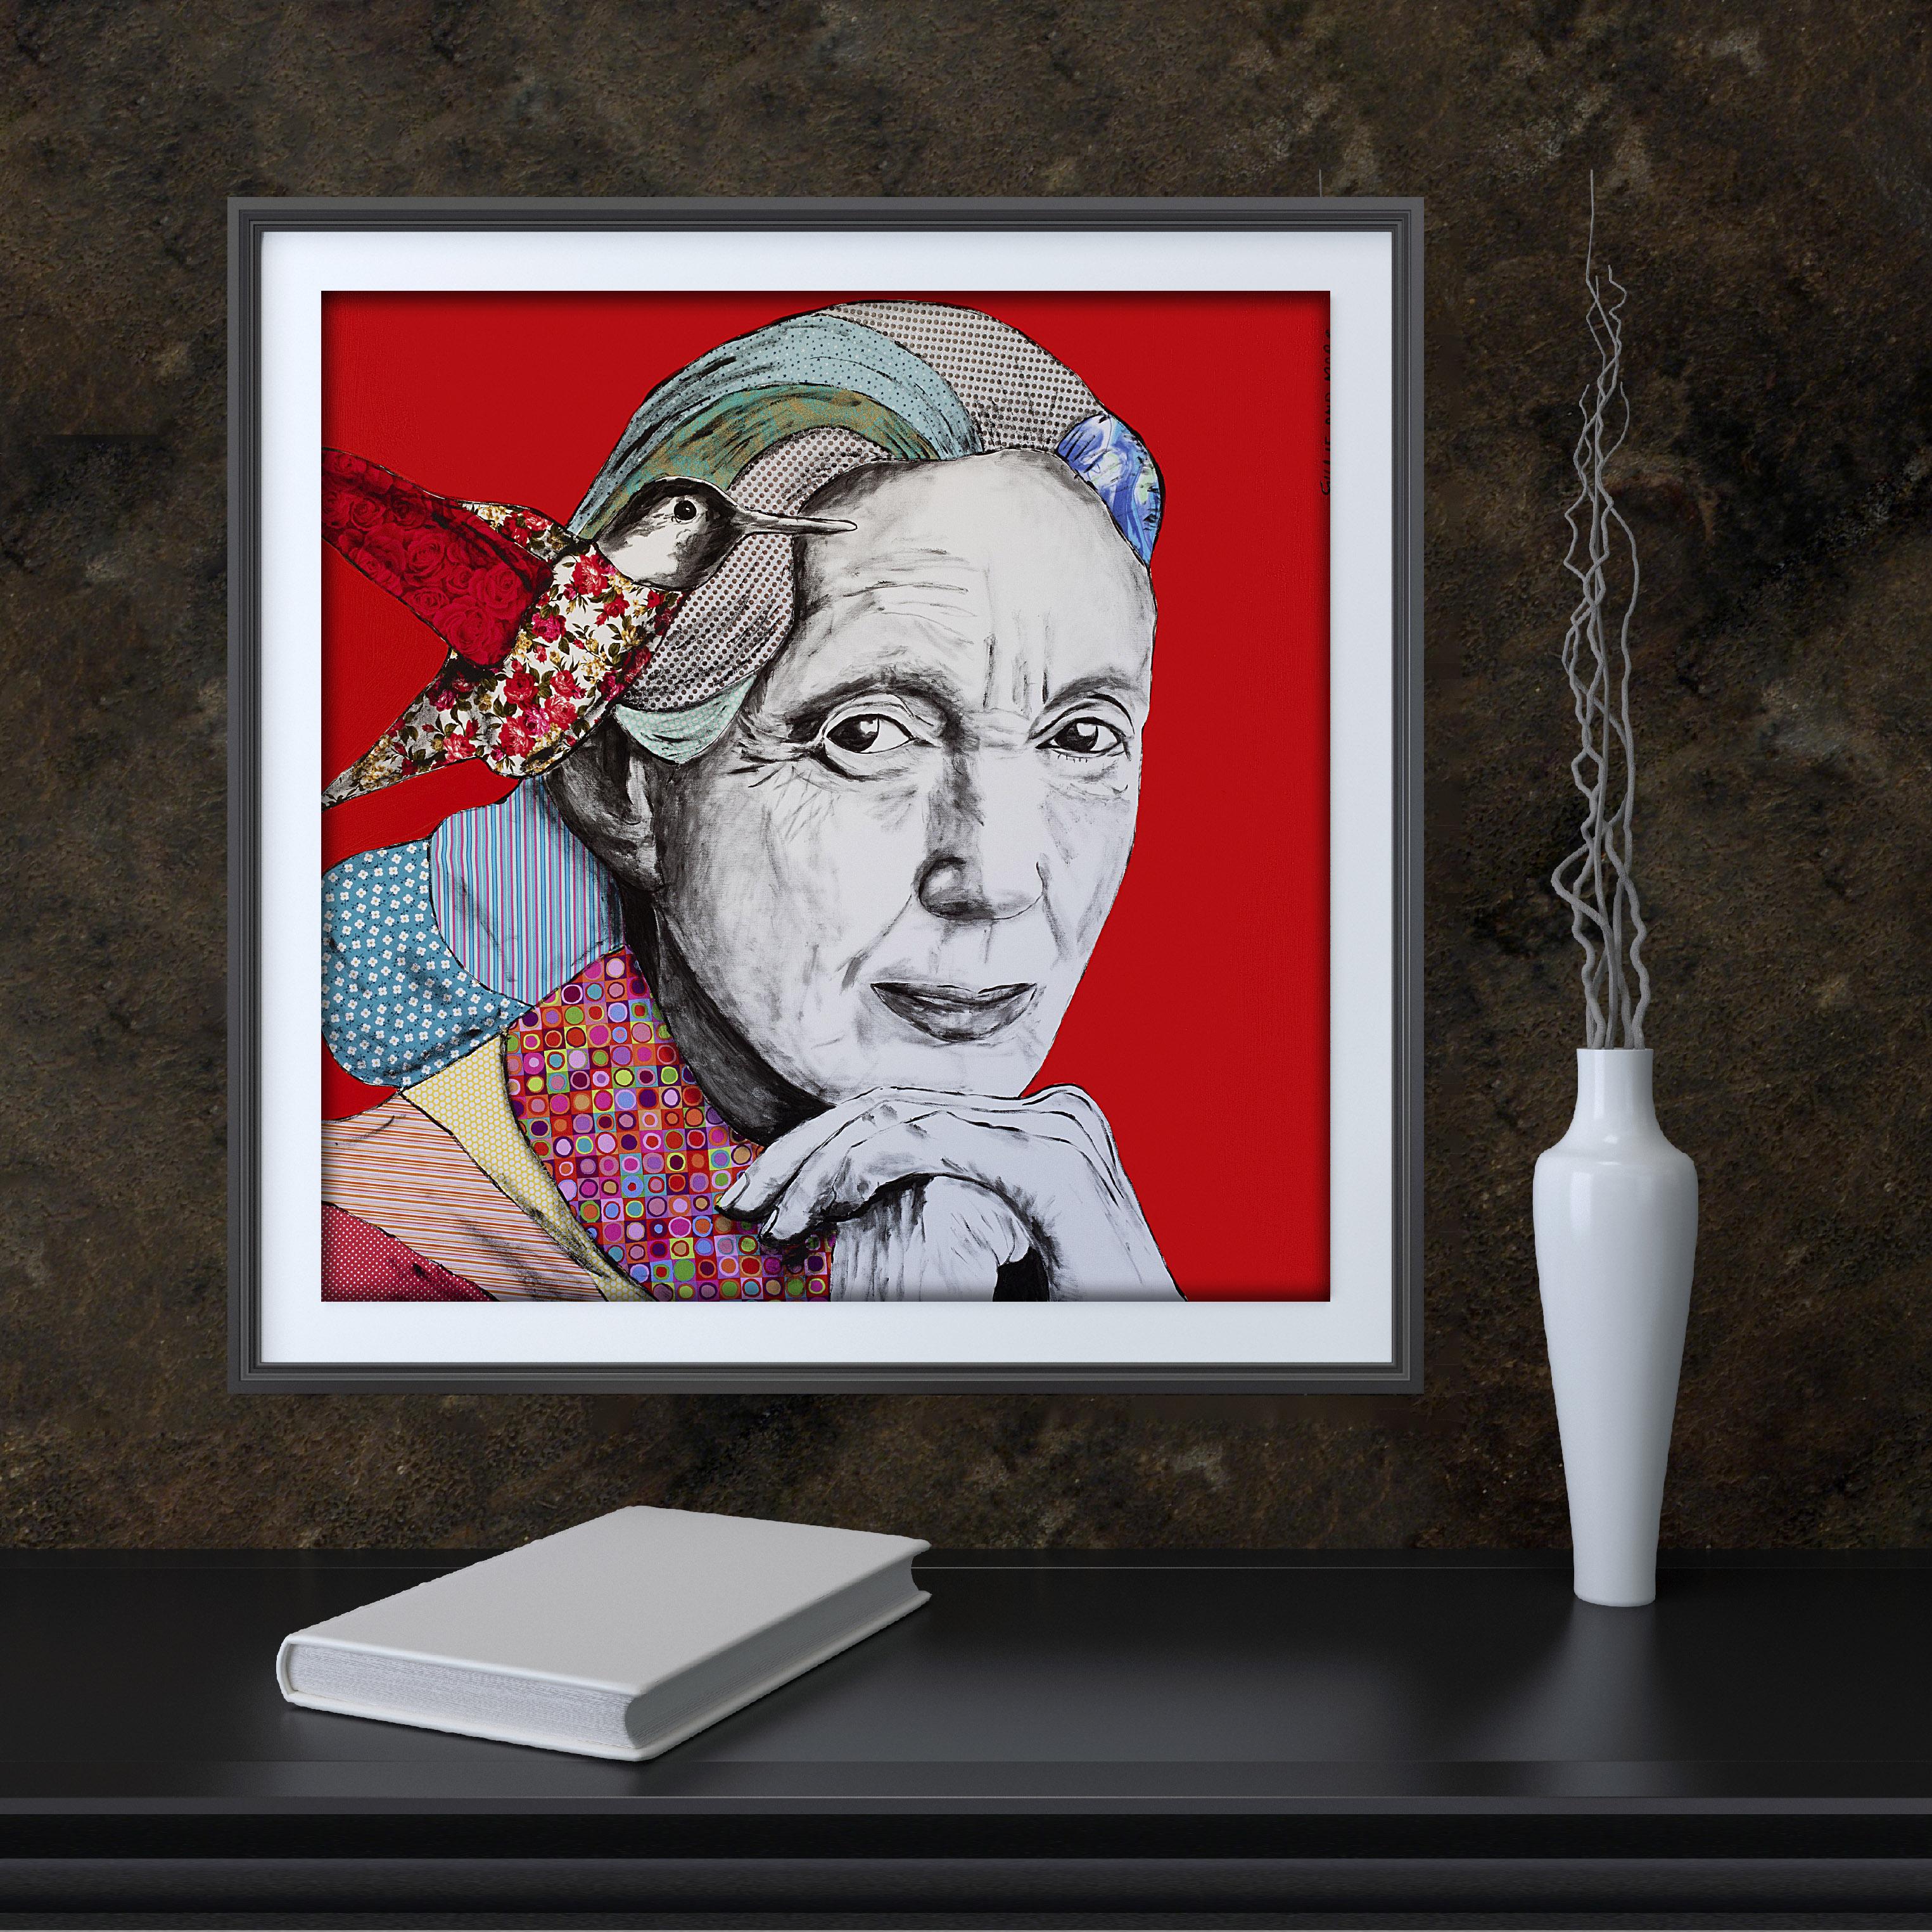 Animal Print - Gillie and Marc - Art - Limited Edition - Women - Equality Jane - Gray Portrait Painting by Gillie and Marc Schattner